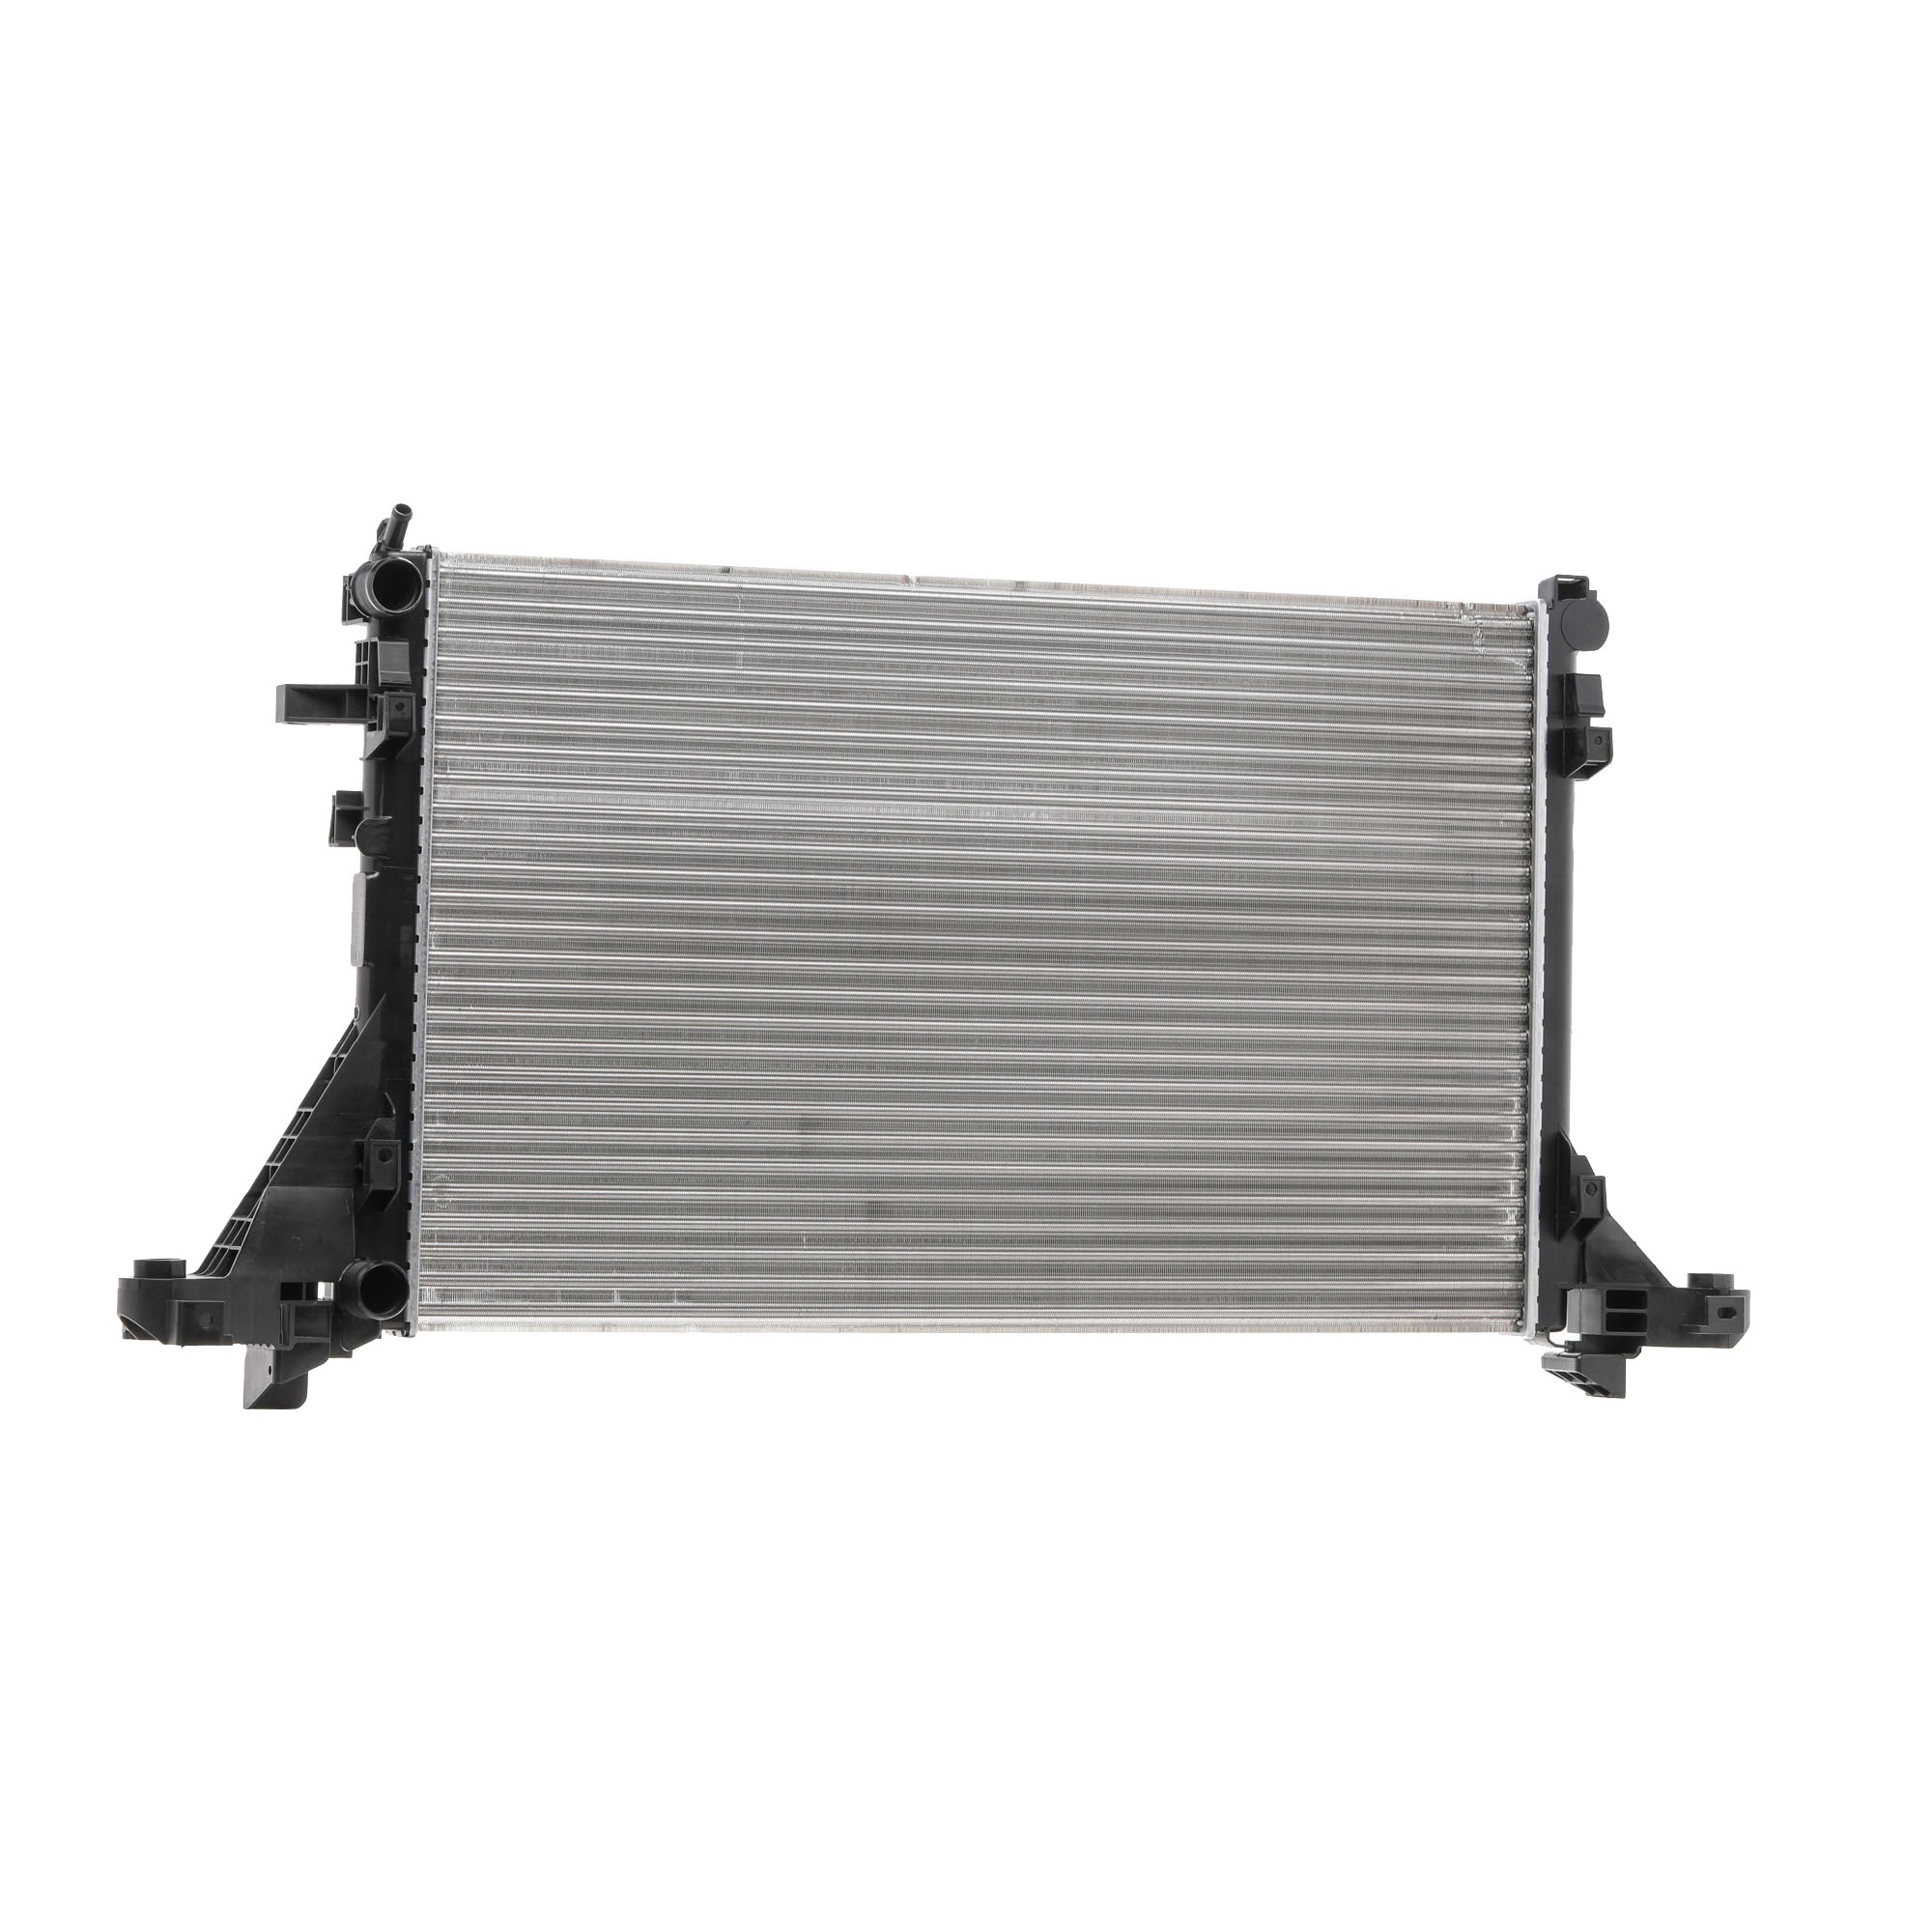 RIDEX Aluminium, for vehicles without air conditioning, 776 x 480 x 26 mm, Manual Transmission, Mechanically jointed cooling fins Radiator 470R1074 buy